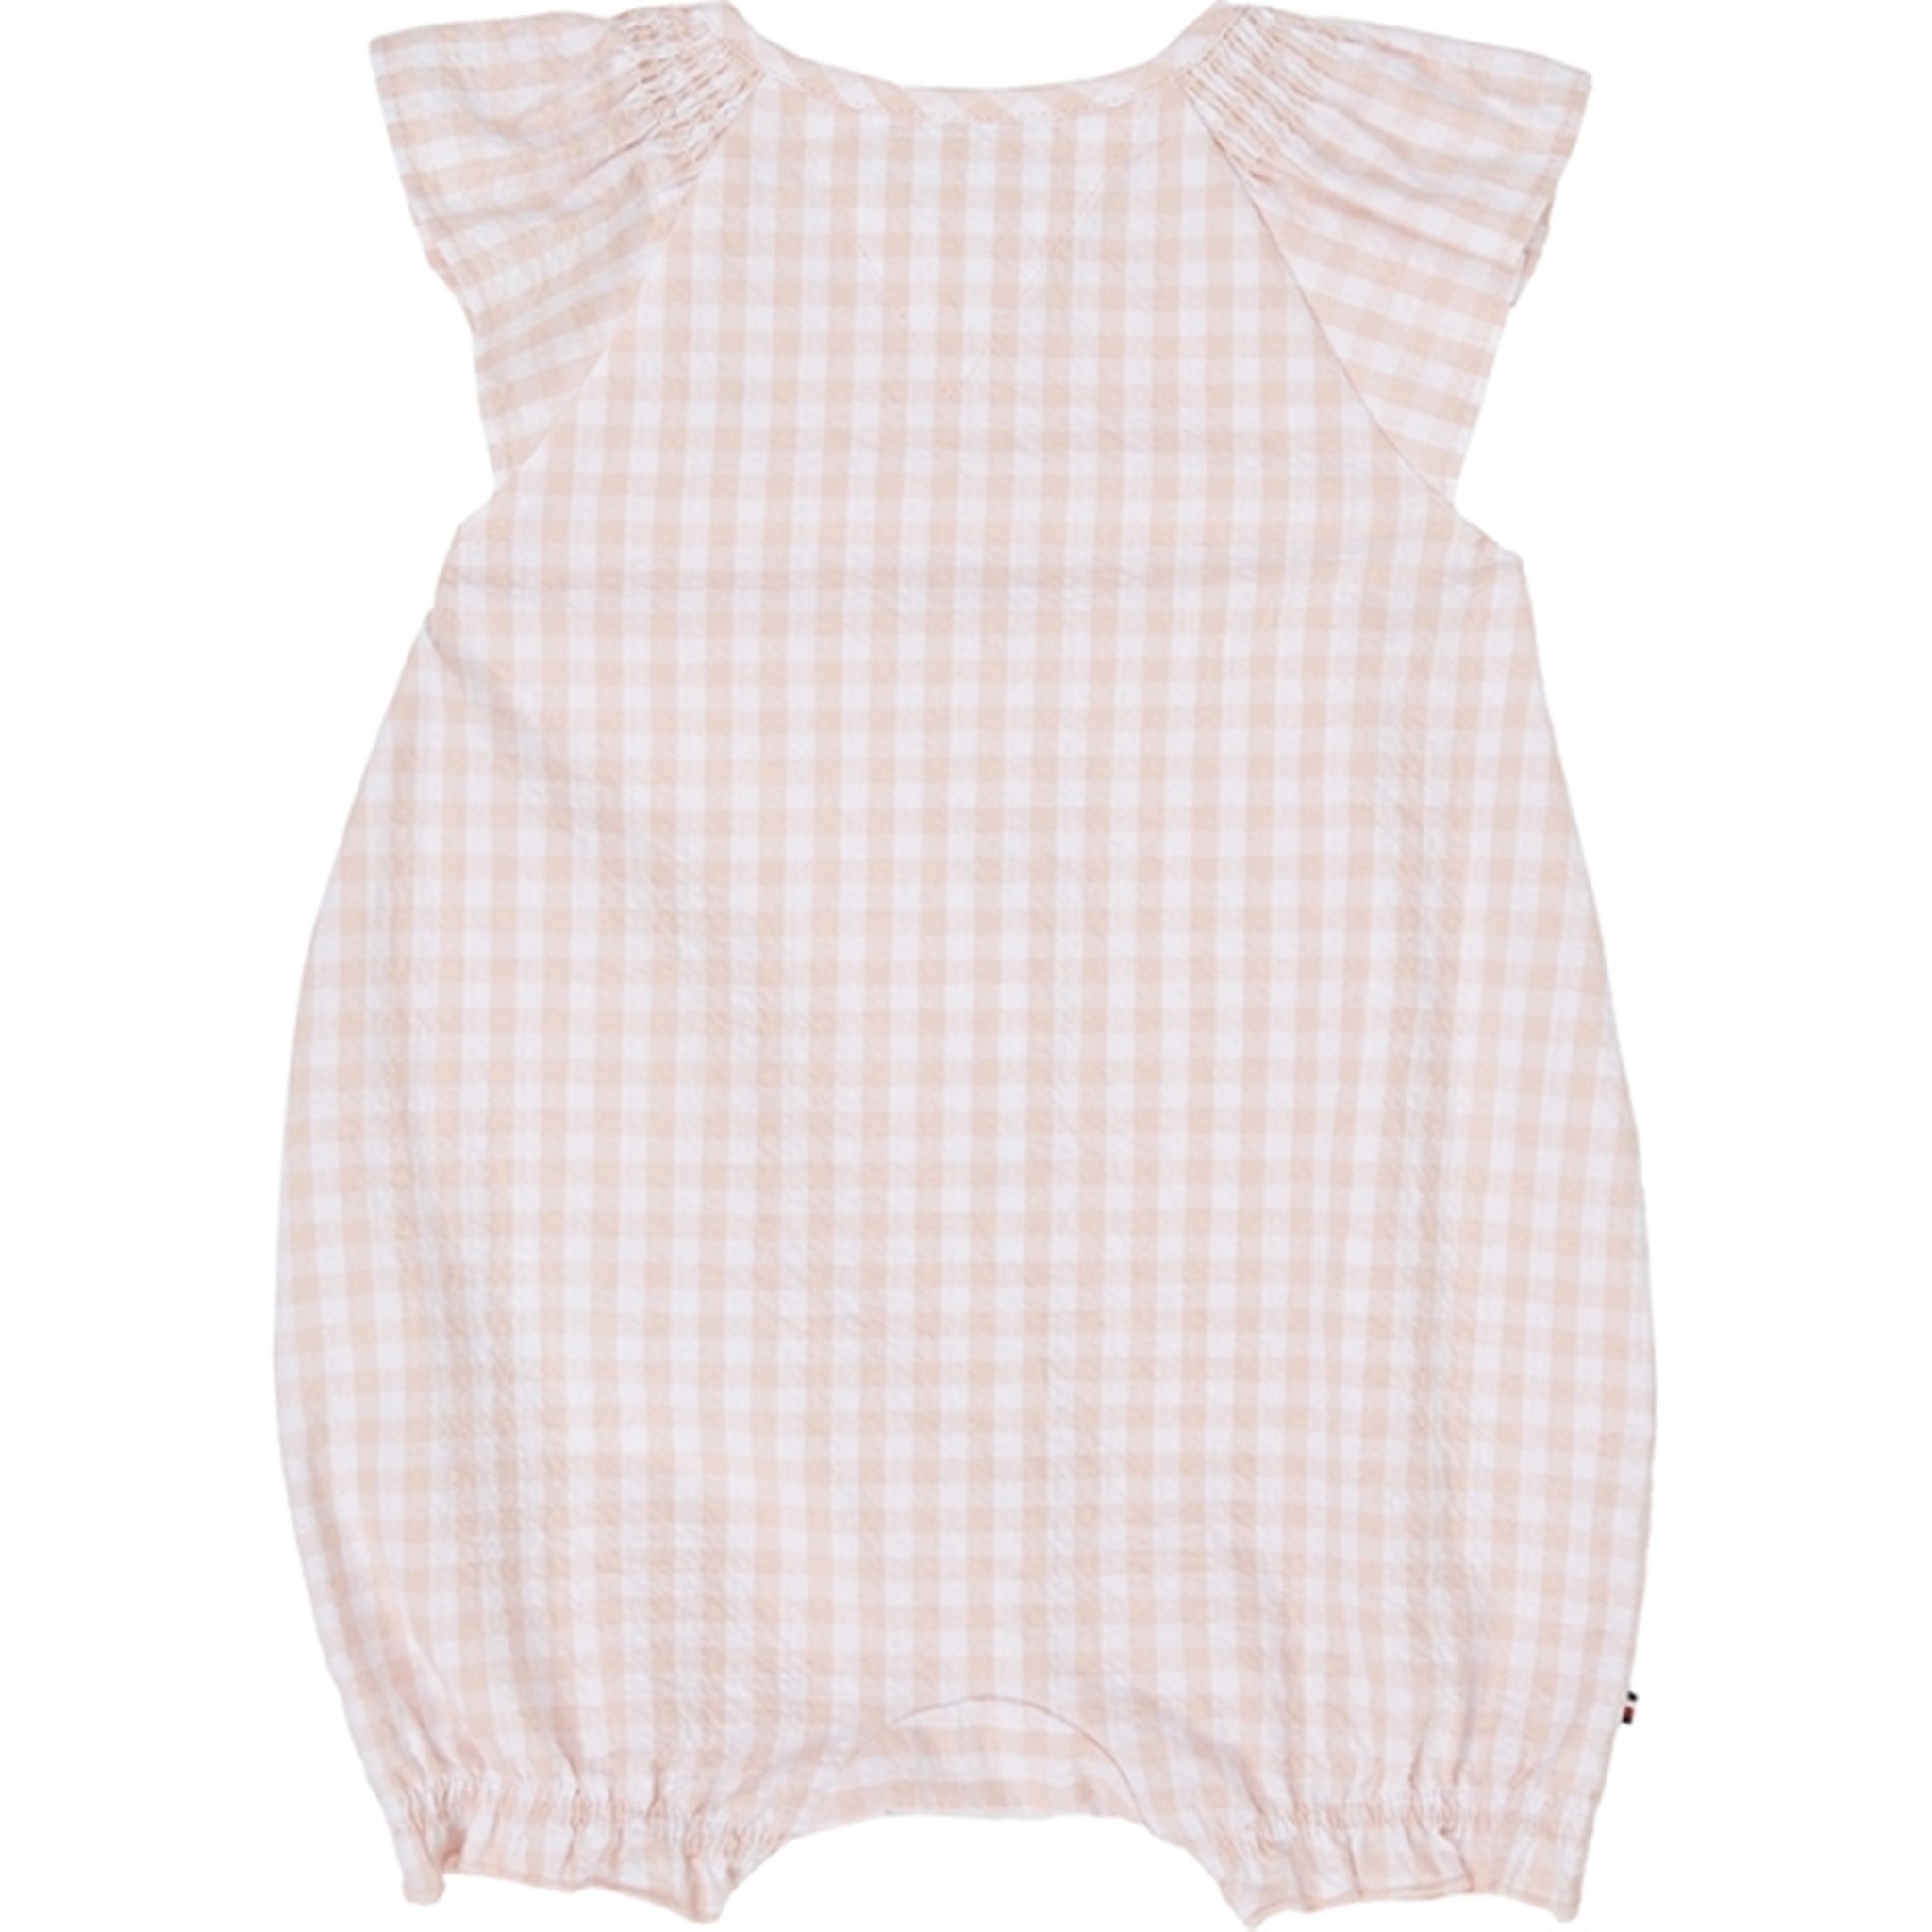 Tommy Hilfiger Baby Ruffle Gingham Rompers White / Pink Check 3